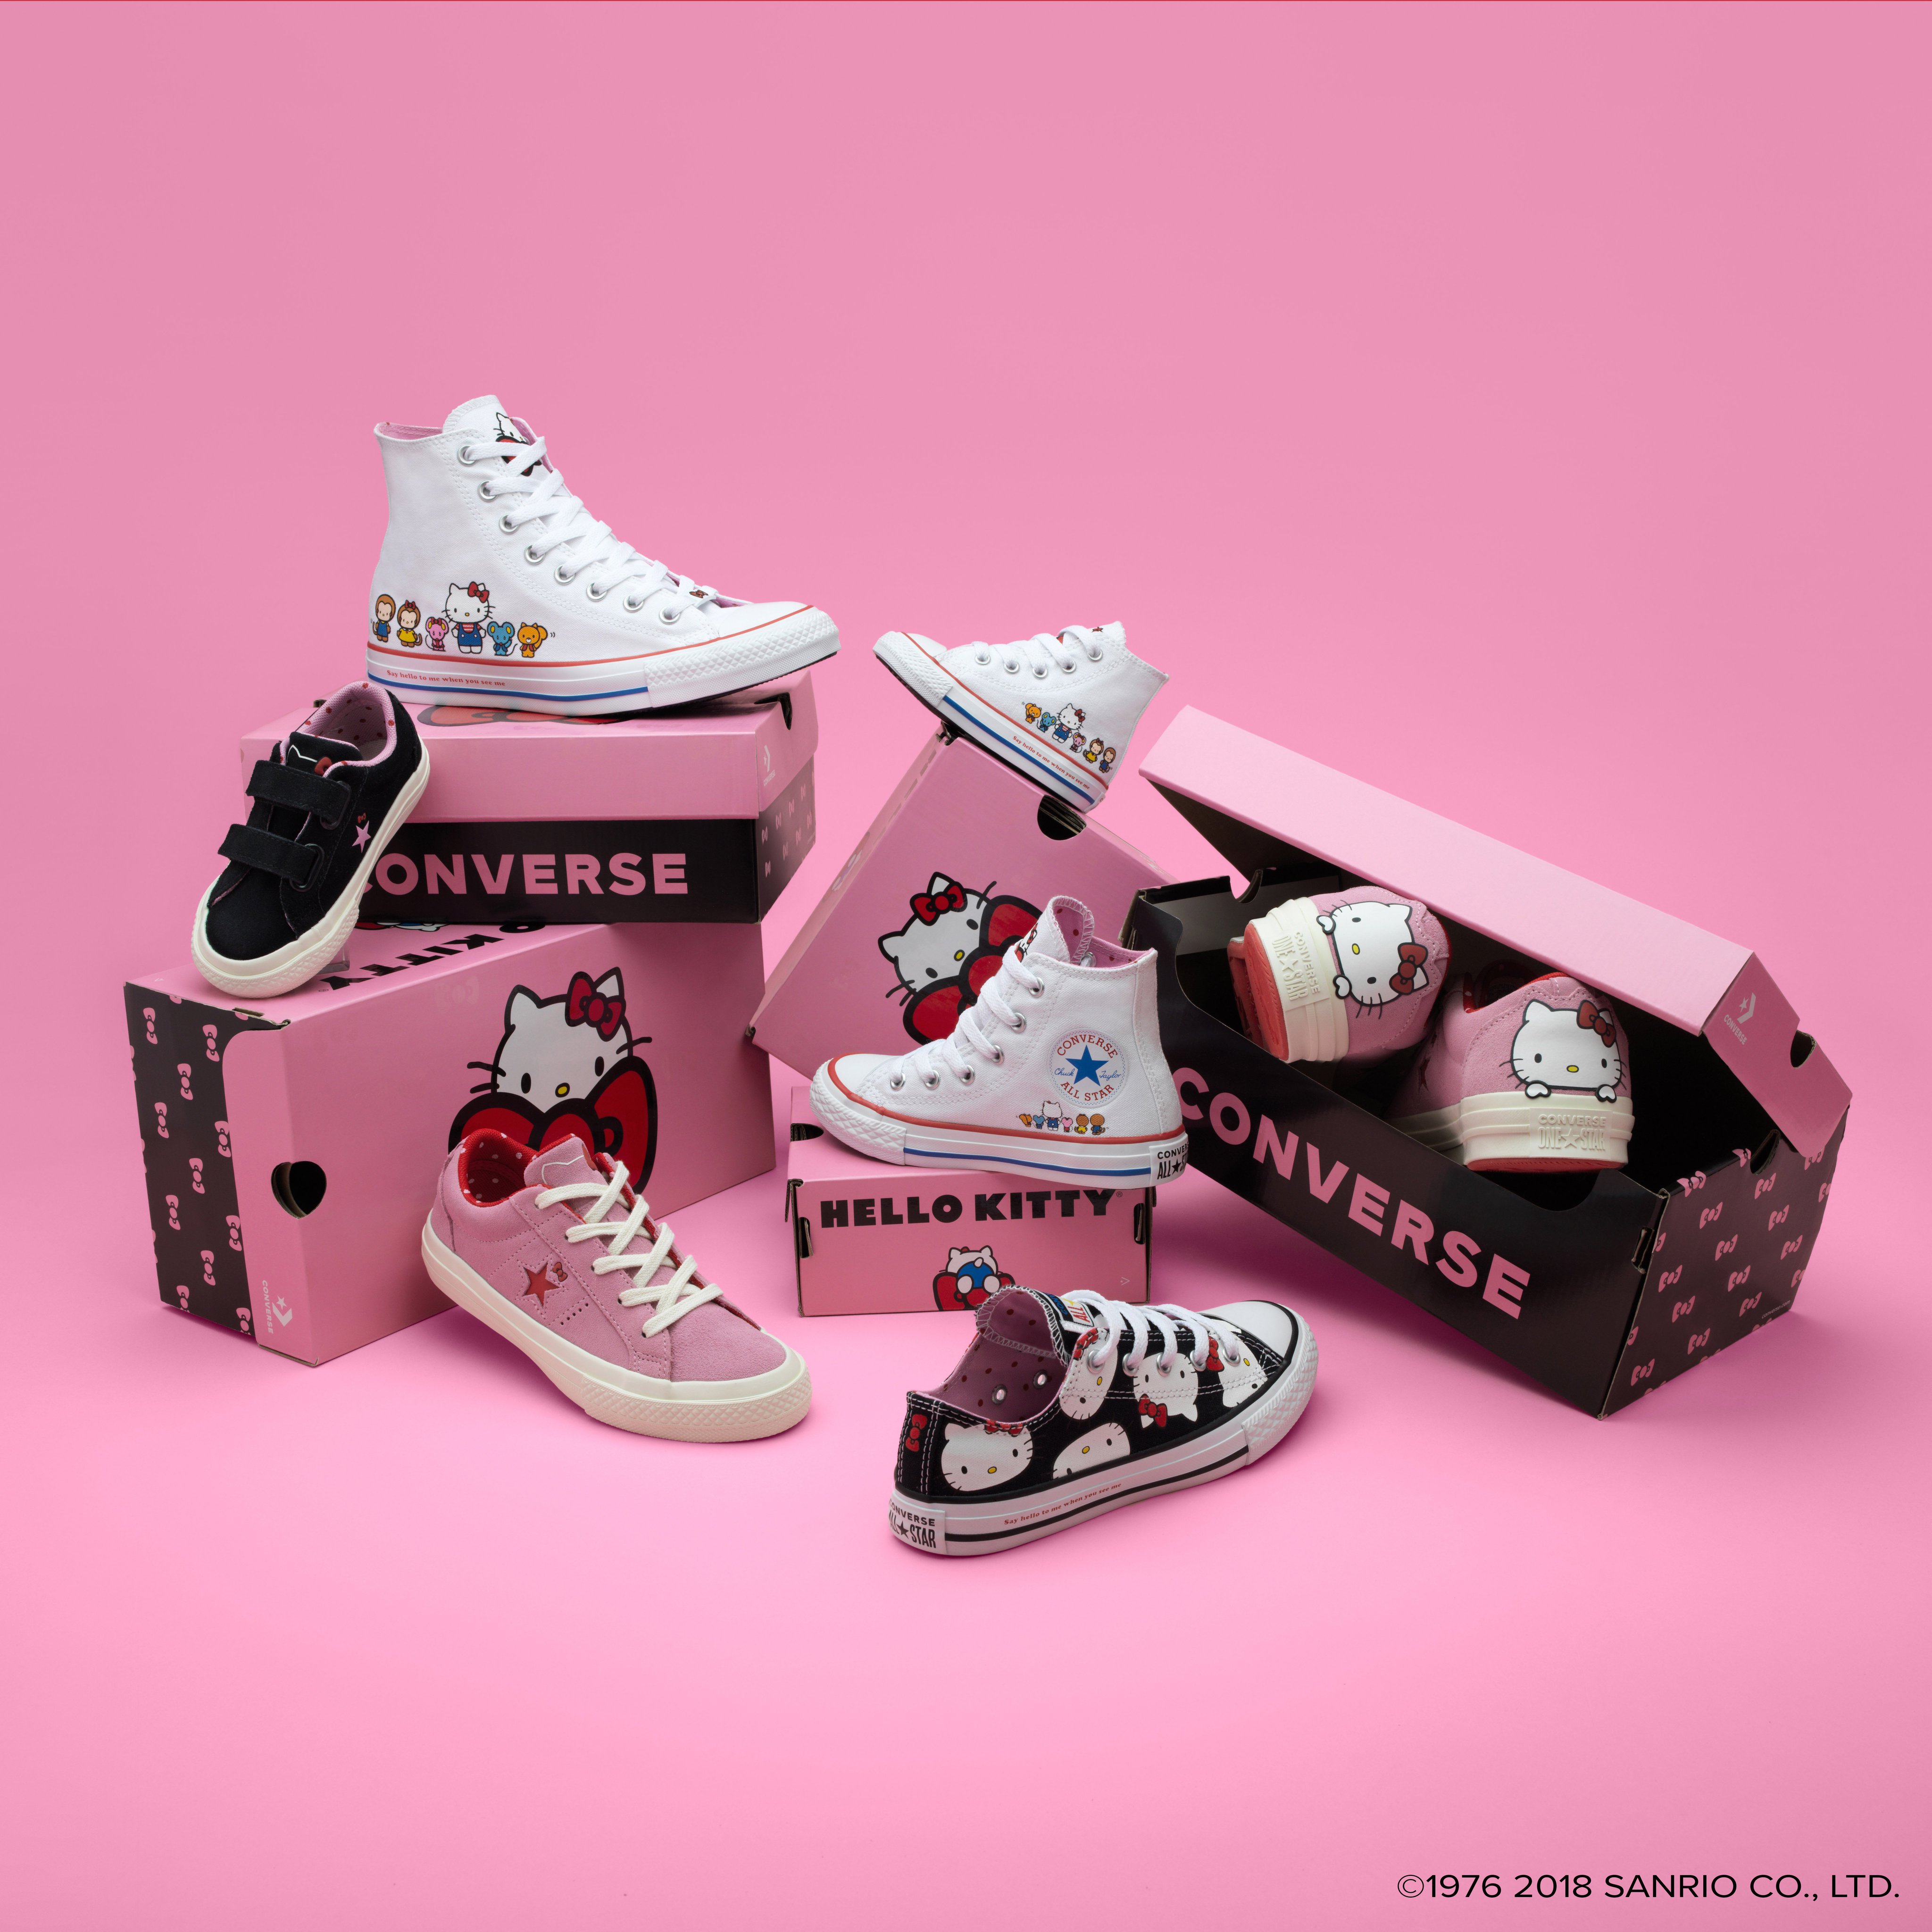 Hello Kitty on Twitter: "It's here! Say hello to self-expression and originality with and @Converse. #ConverseXHelloKitty is available at https://t.co/7HwKqdJrm5, https://t.co/O67gkbyH73, and select Visit ...